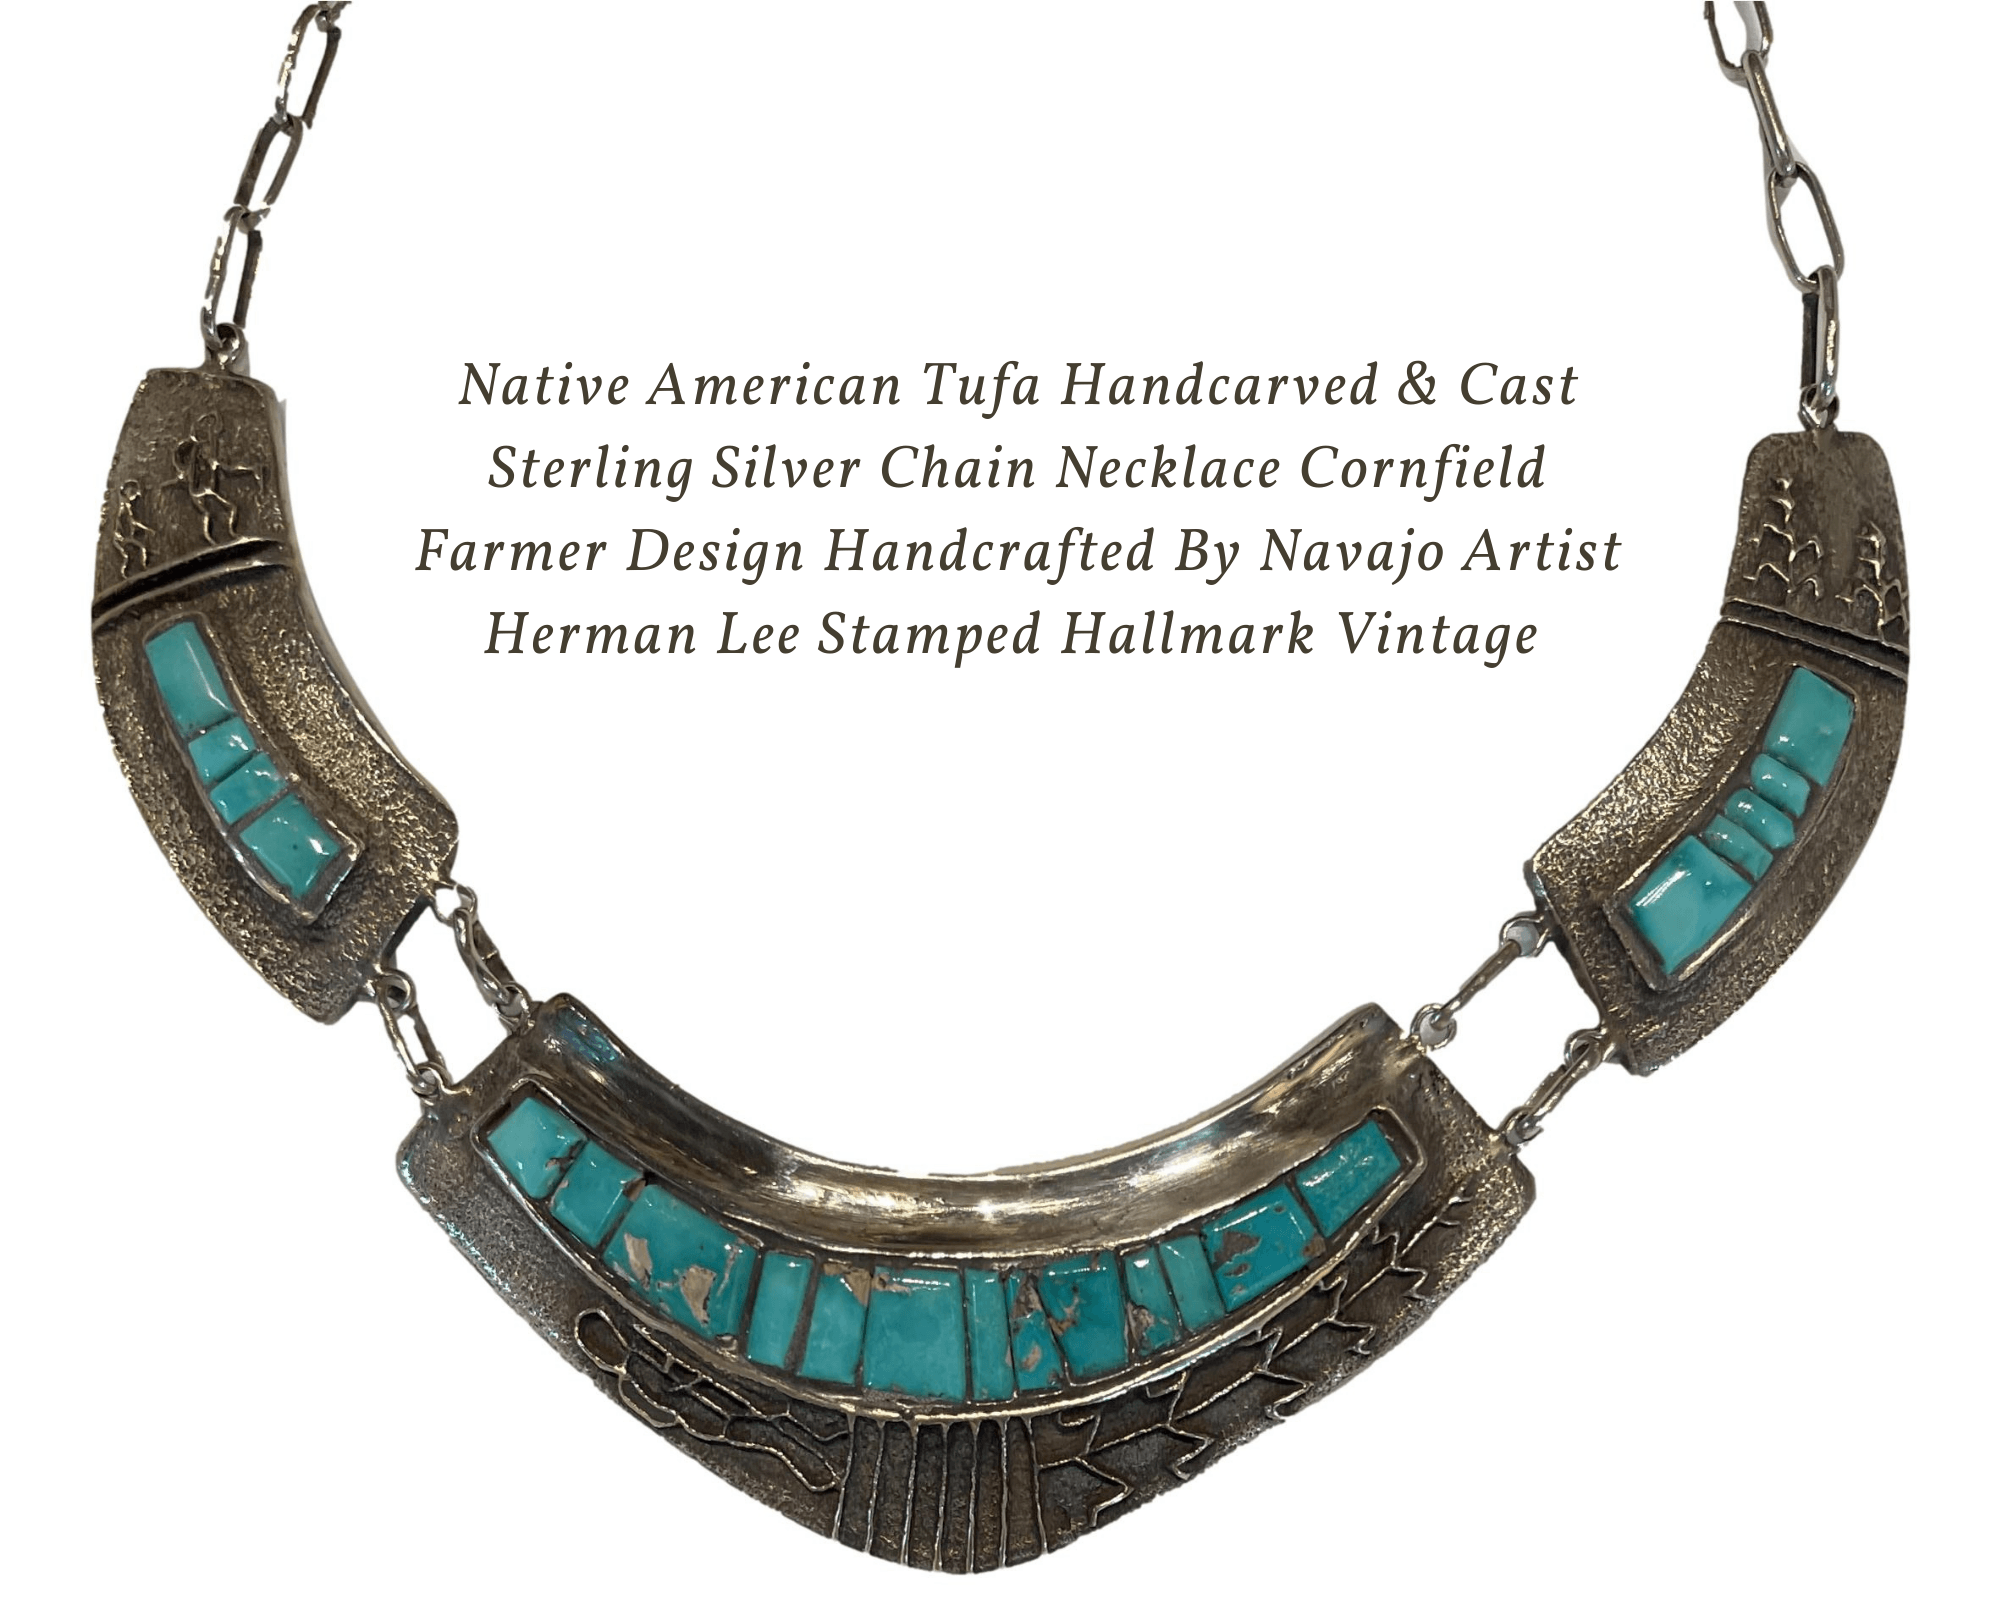 Native American Tufa Handcarved & Cast Sterling Silver Chain Necklace Cornfield Farmer Design Handcrafted By Navajo Artist Herman Lee Stamped Hallmark - Ysleta Mission Gift Shop- VOTED El Paso's Best Gift Shop